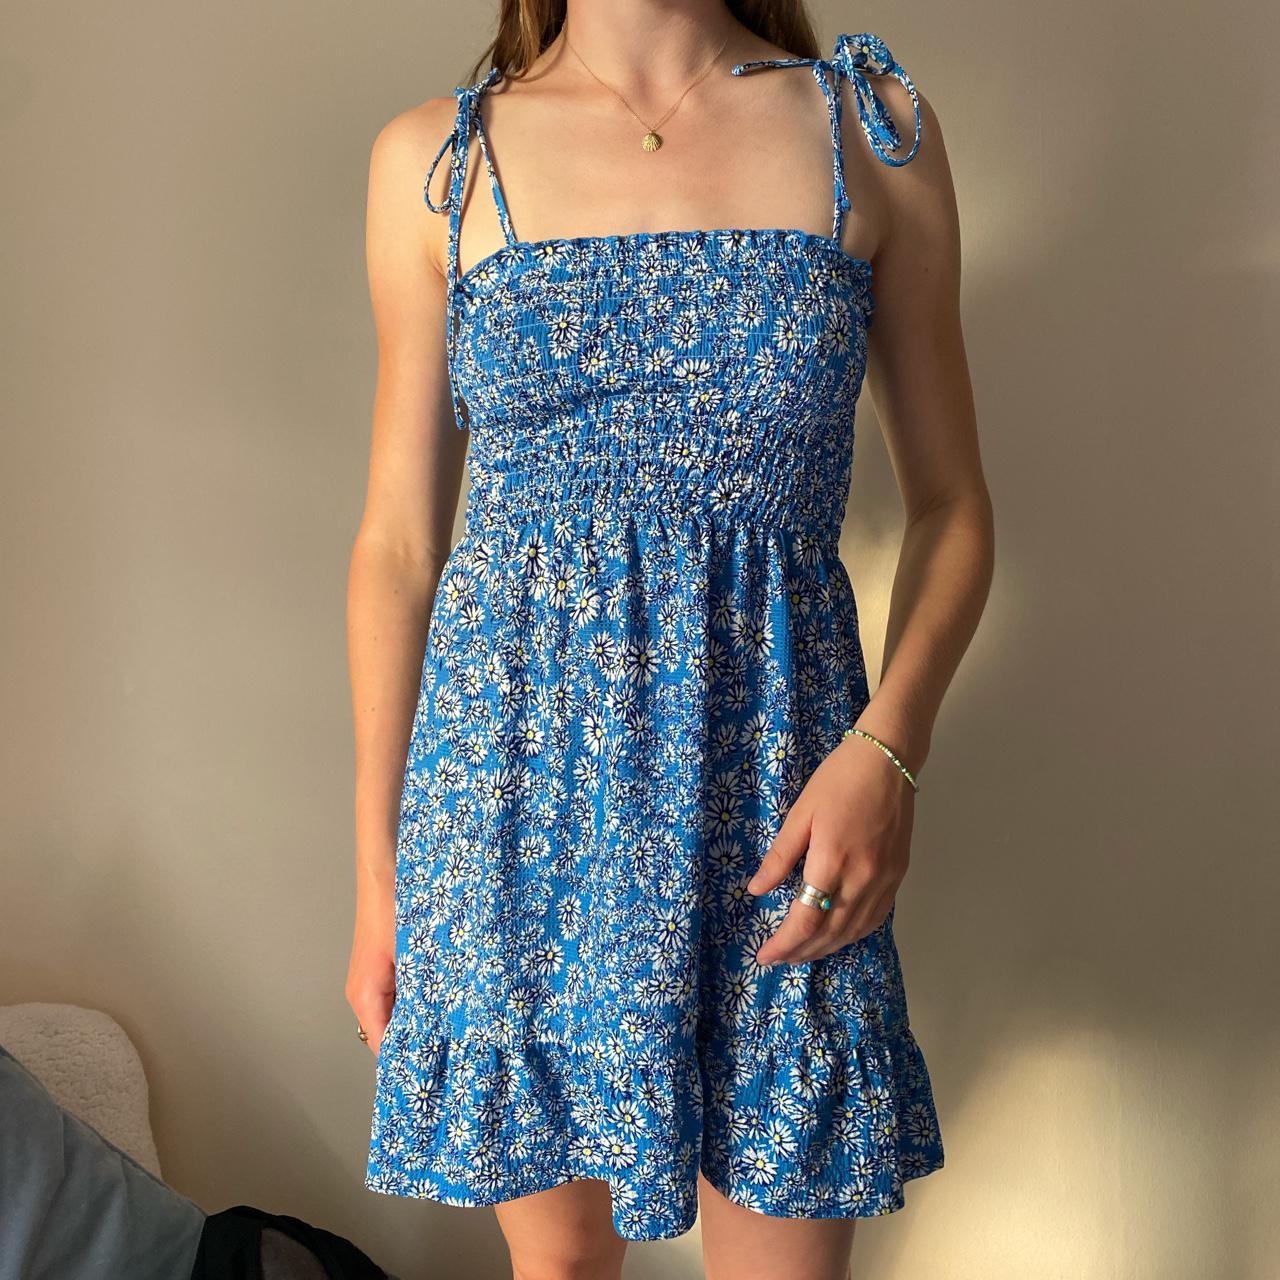 Topshop daisy blue dress. With ties ah ...